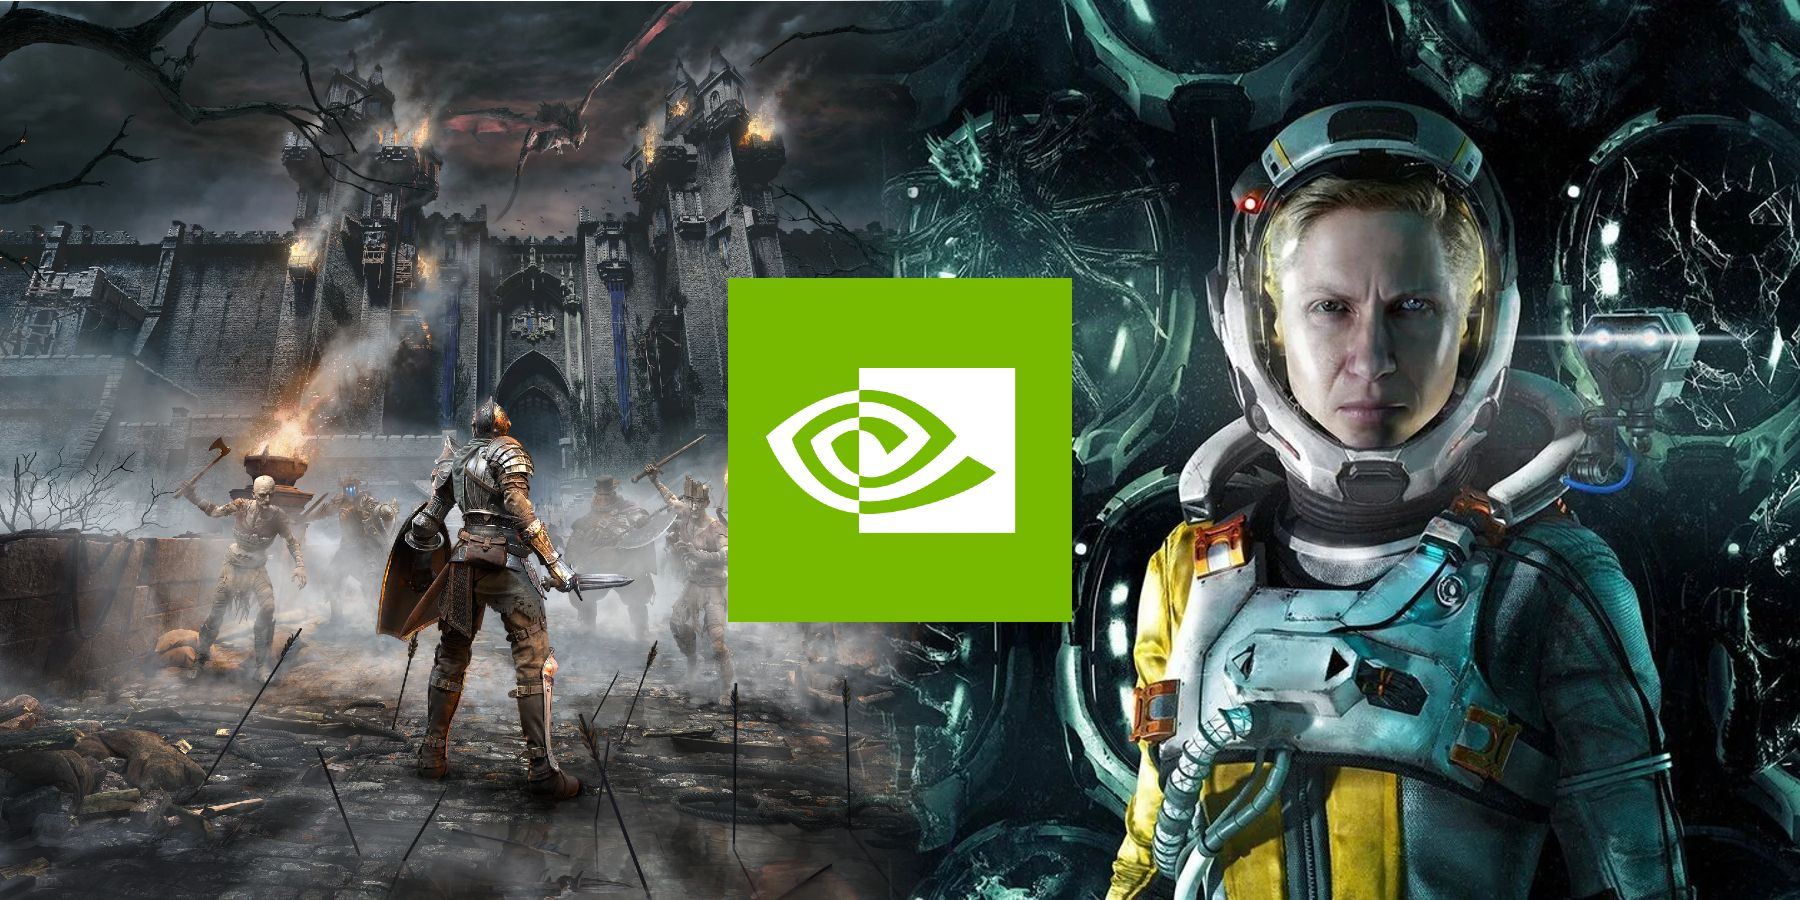 GeForce Now Leak 2.0 - More PlayStation games are coming to PC. Ghost of  Tsushima, HZD: Forbidden West, Ratchet & Clank and more : r/IndianGaming